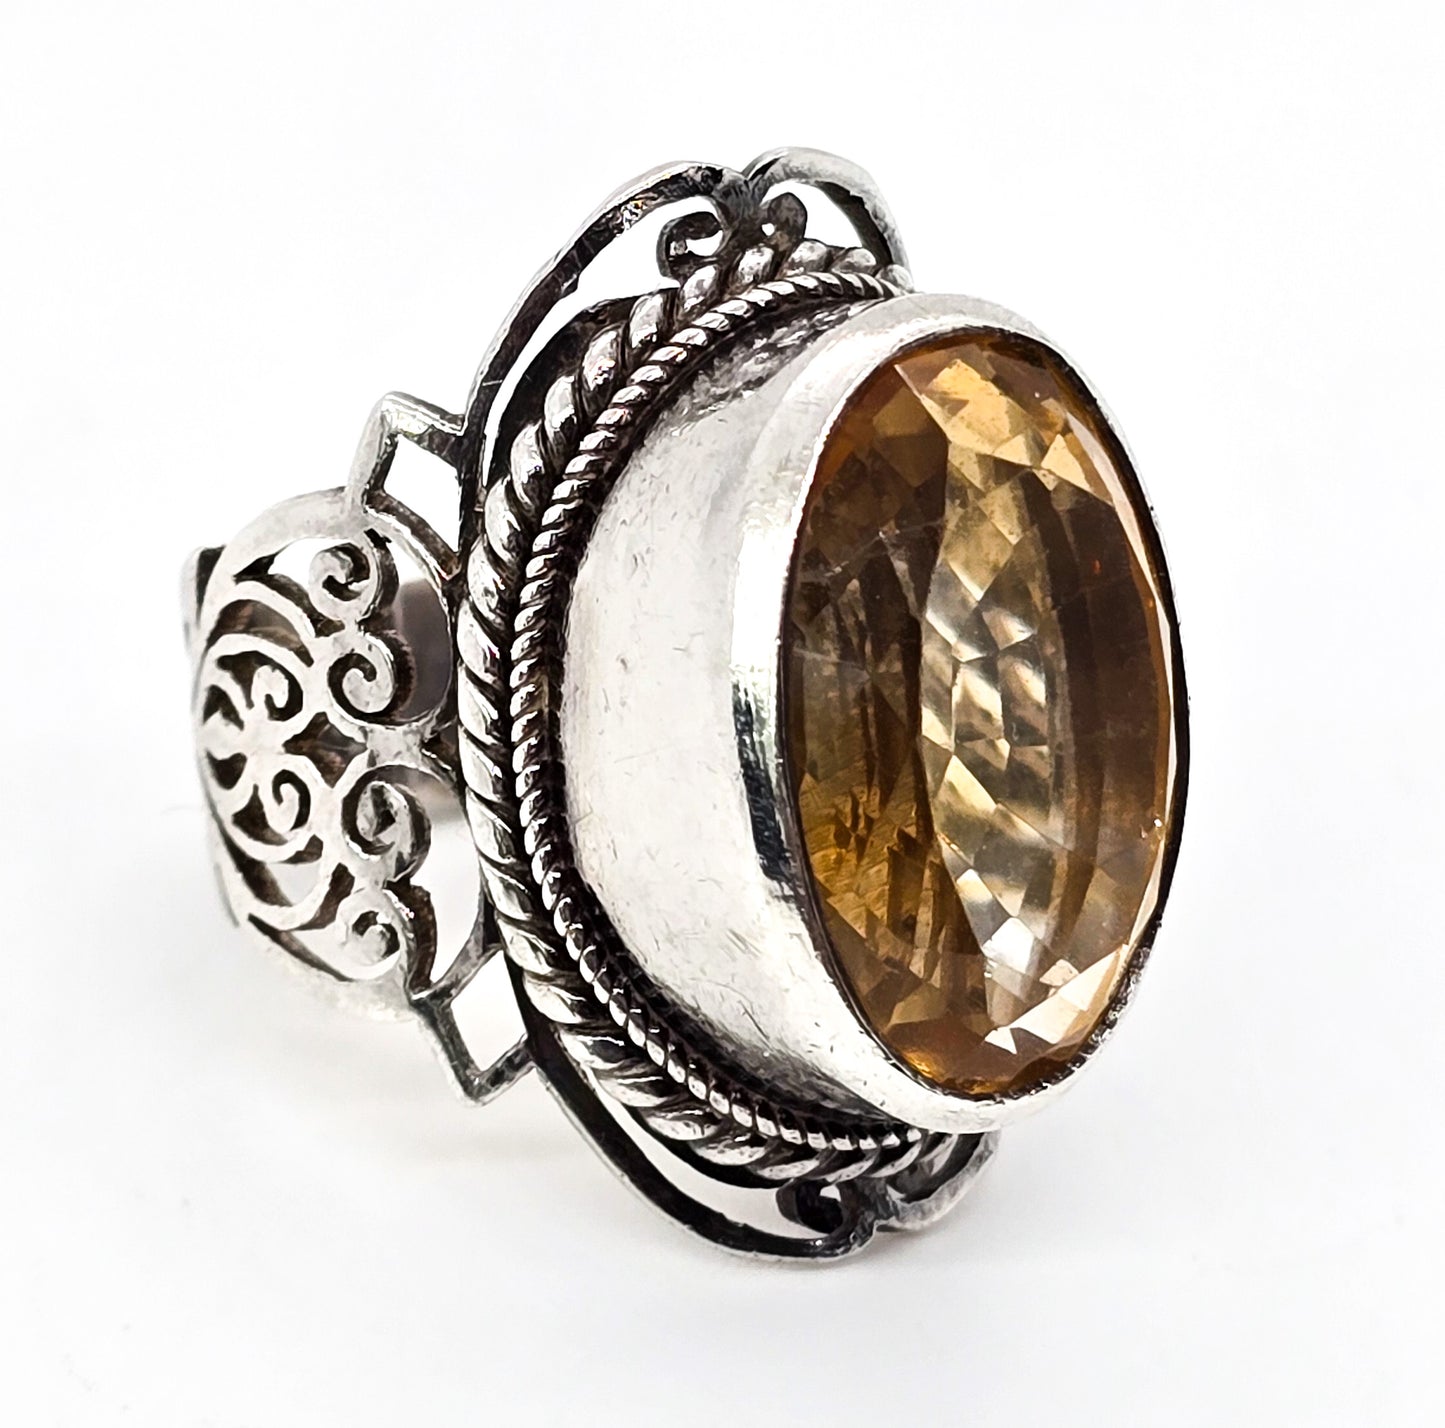 Large Faceted Citrine 15ct Bali Filigree open work sterling silver ring size 7 and 1/2